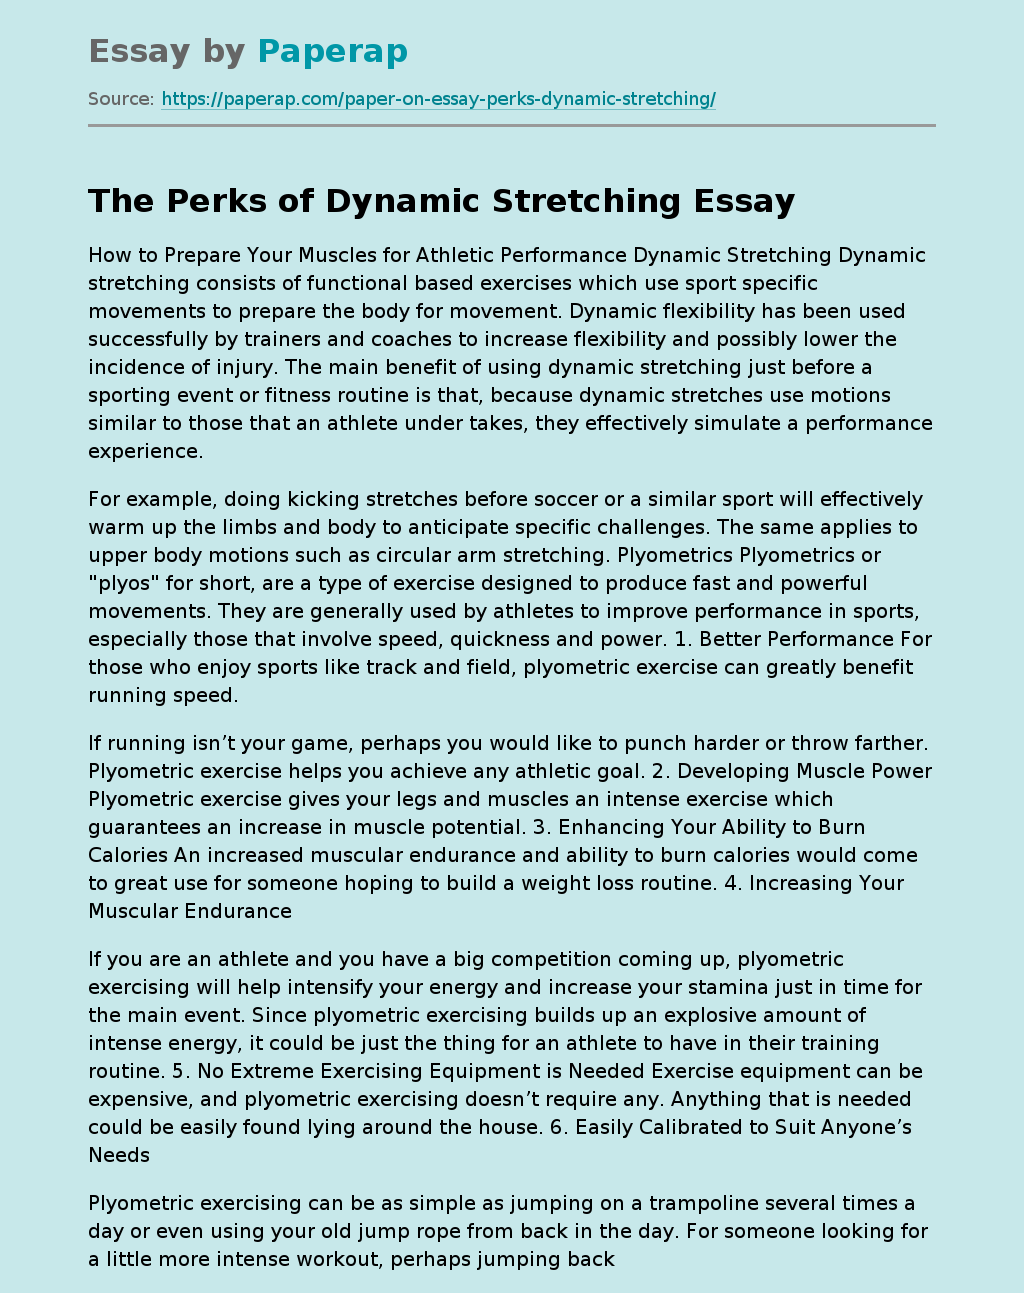 The Perks of Dynamic Stretching